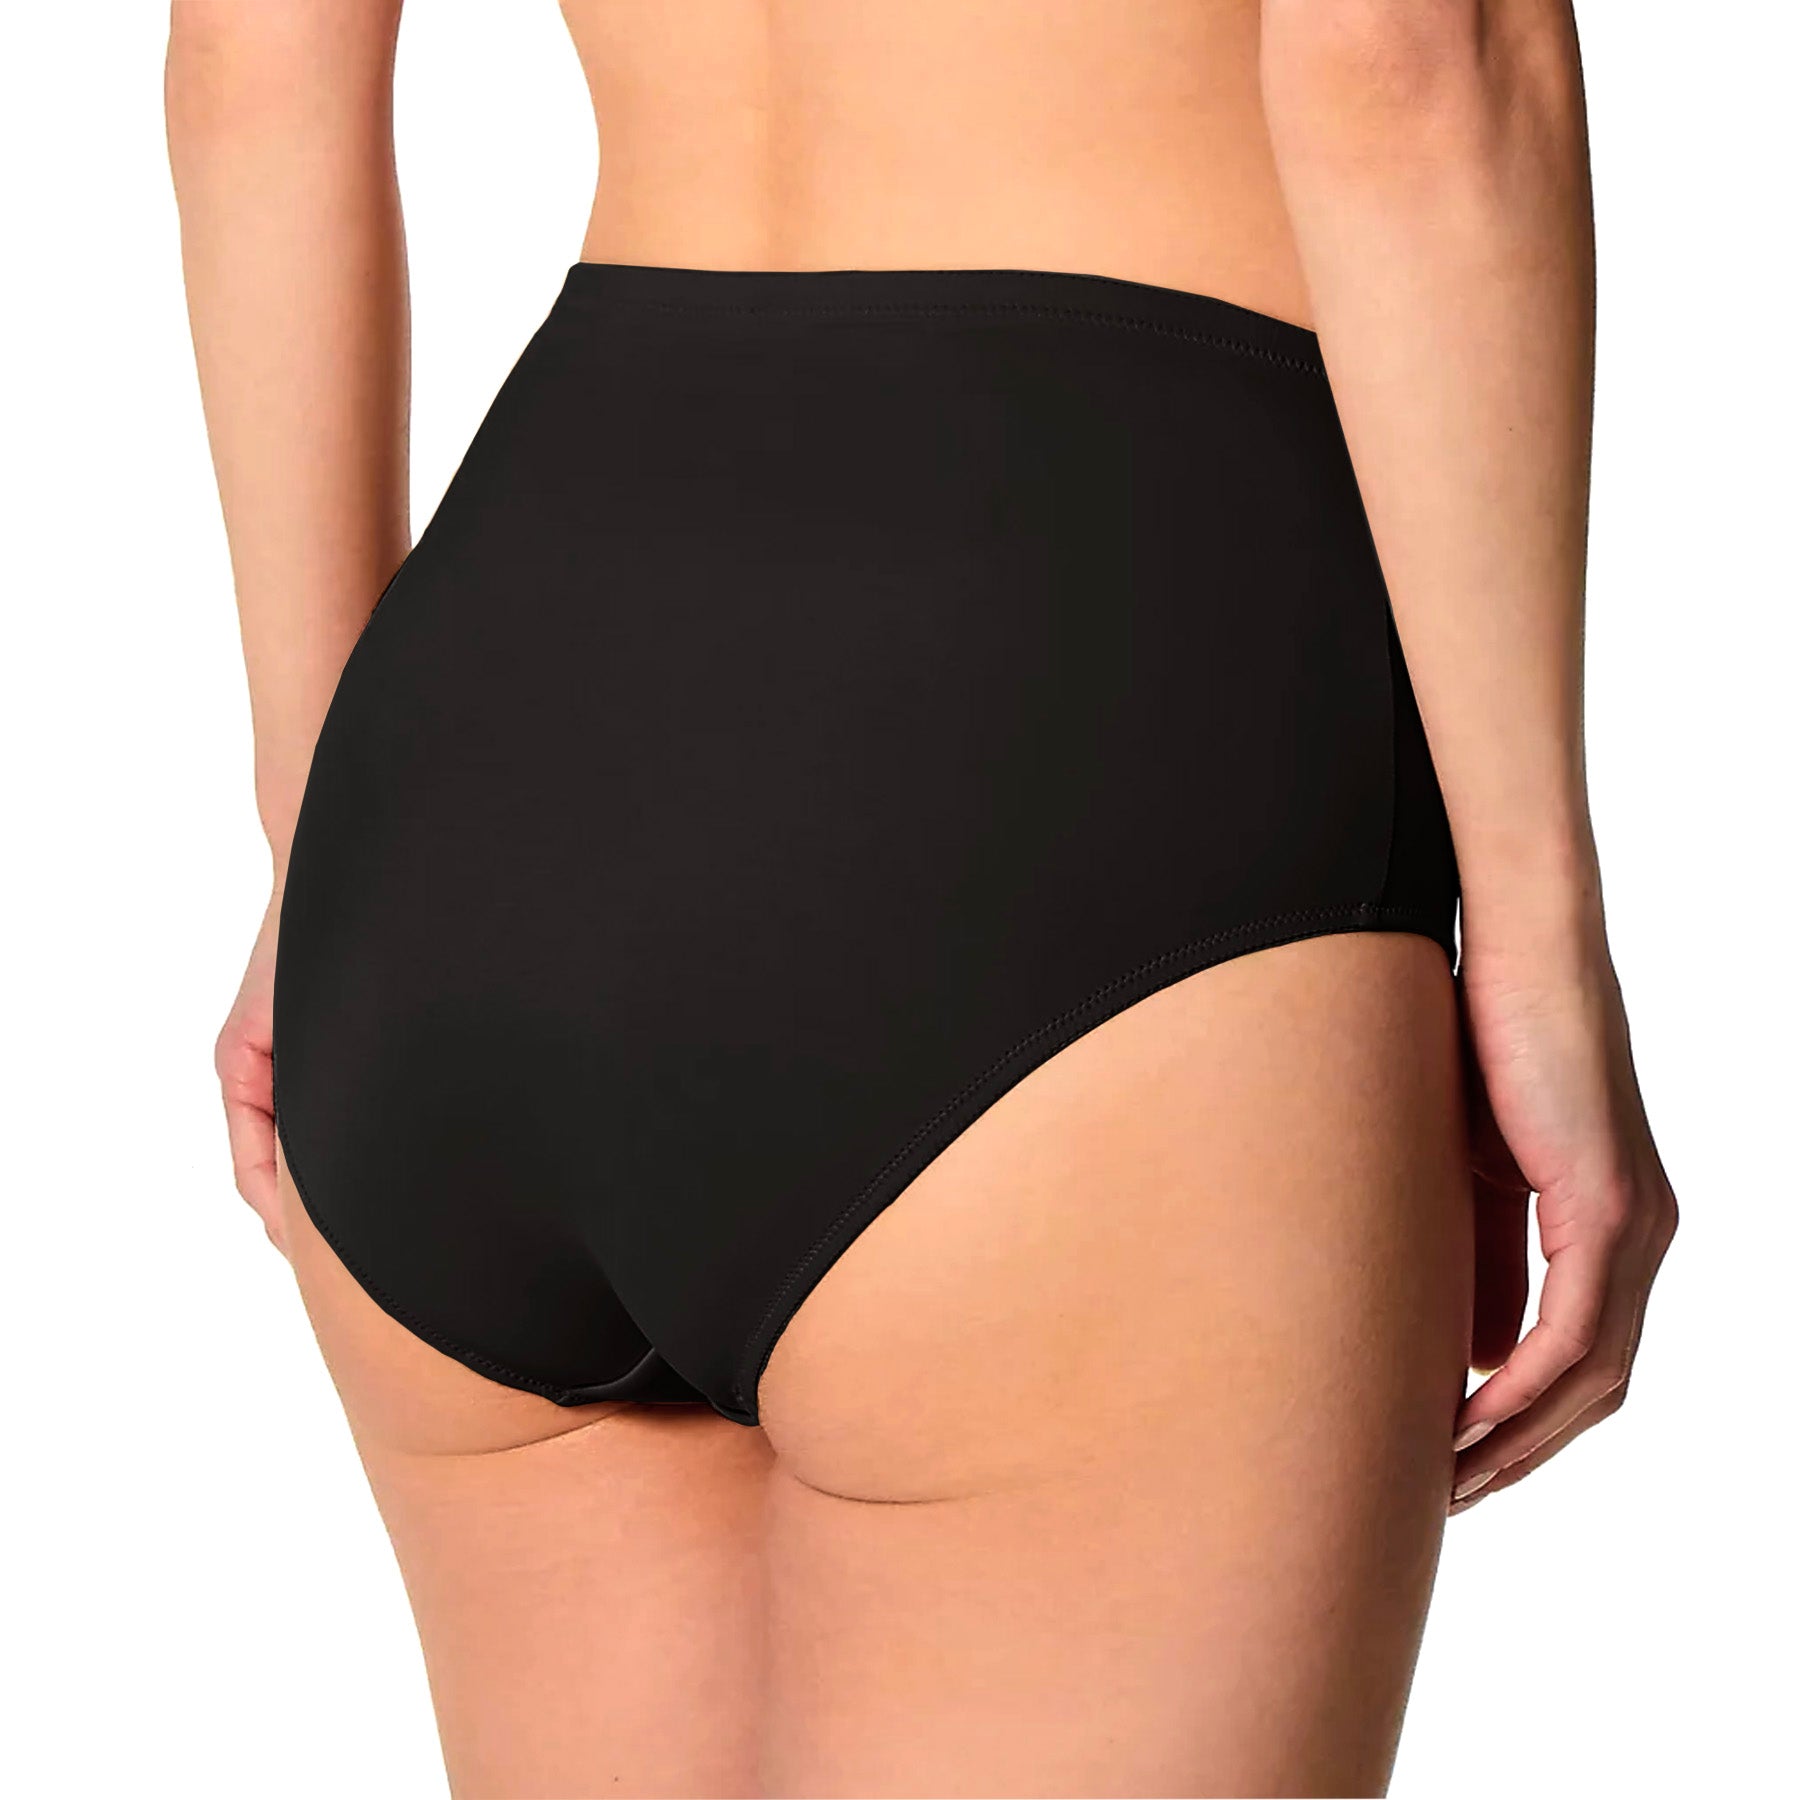 Fit Fully Yours Elise Brief U1813 Black Rear View